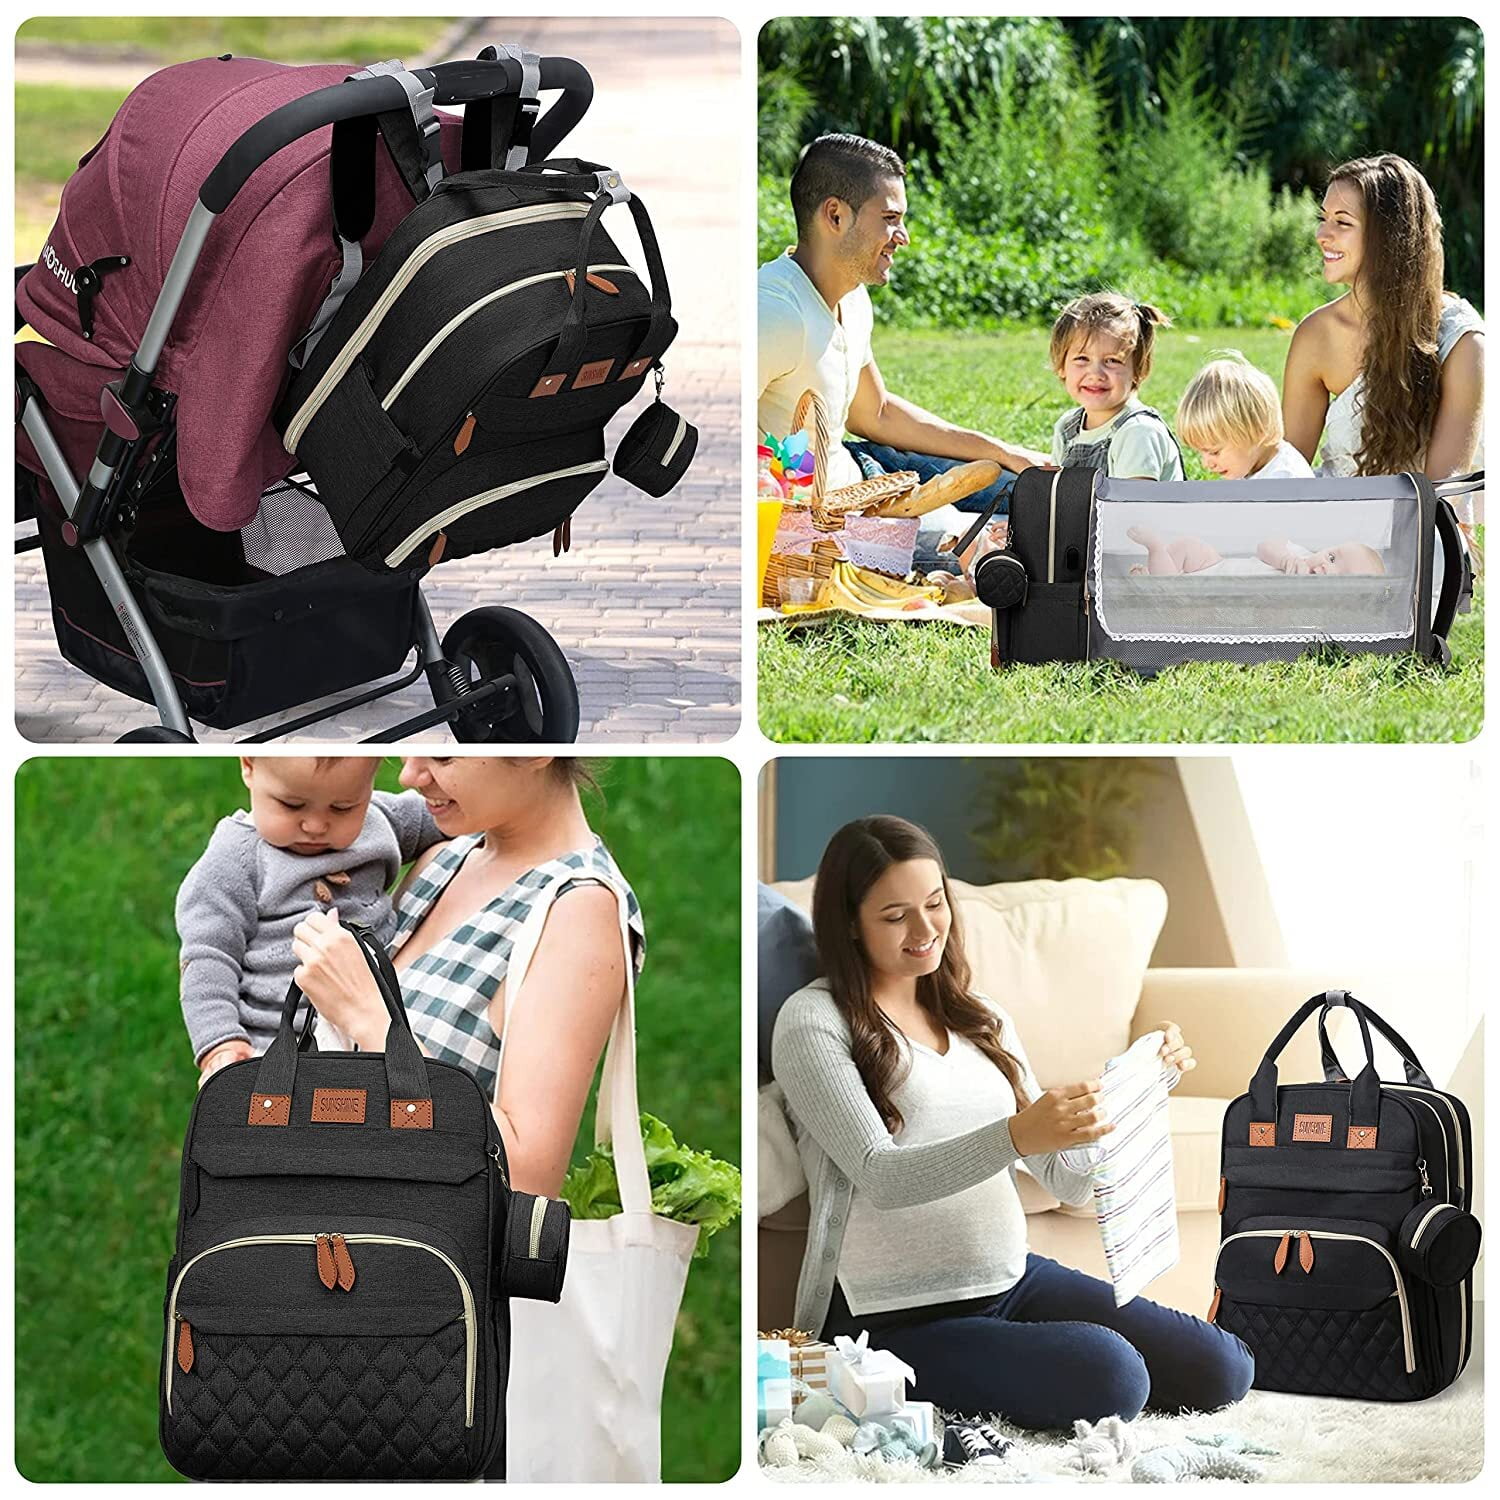 Lamroro Diaper Bag Backpack Foldable Baby Bed, Diaper Changing Station with USB Charging Port, Waterproof Multi-functional Girl Boy Mom Travel Baby